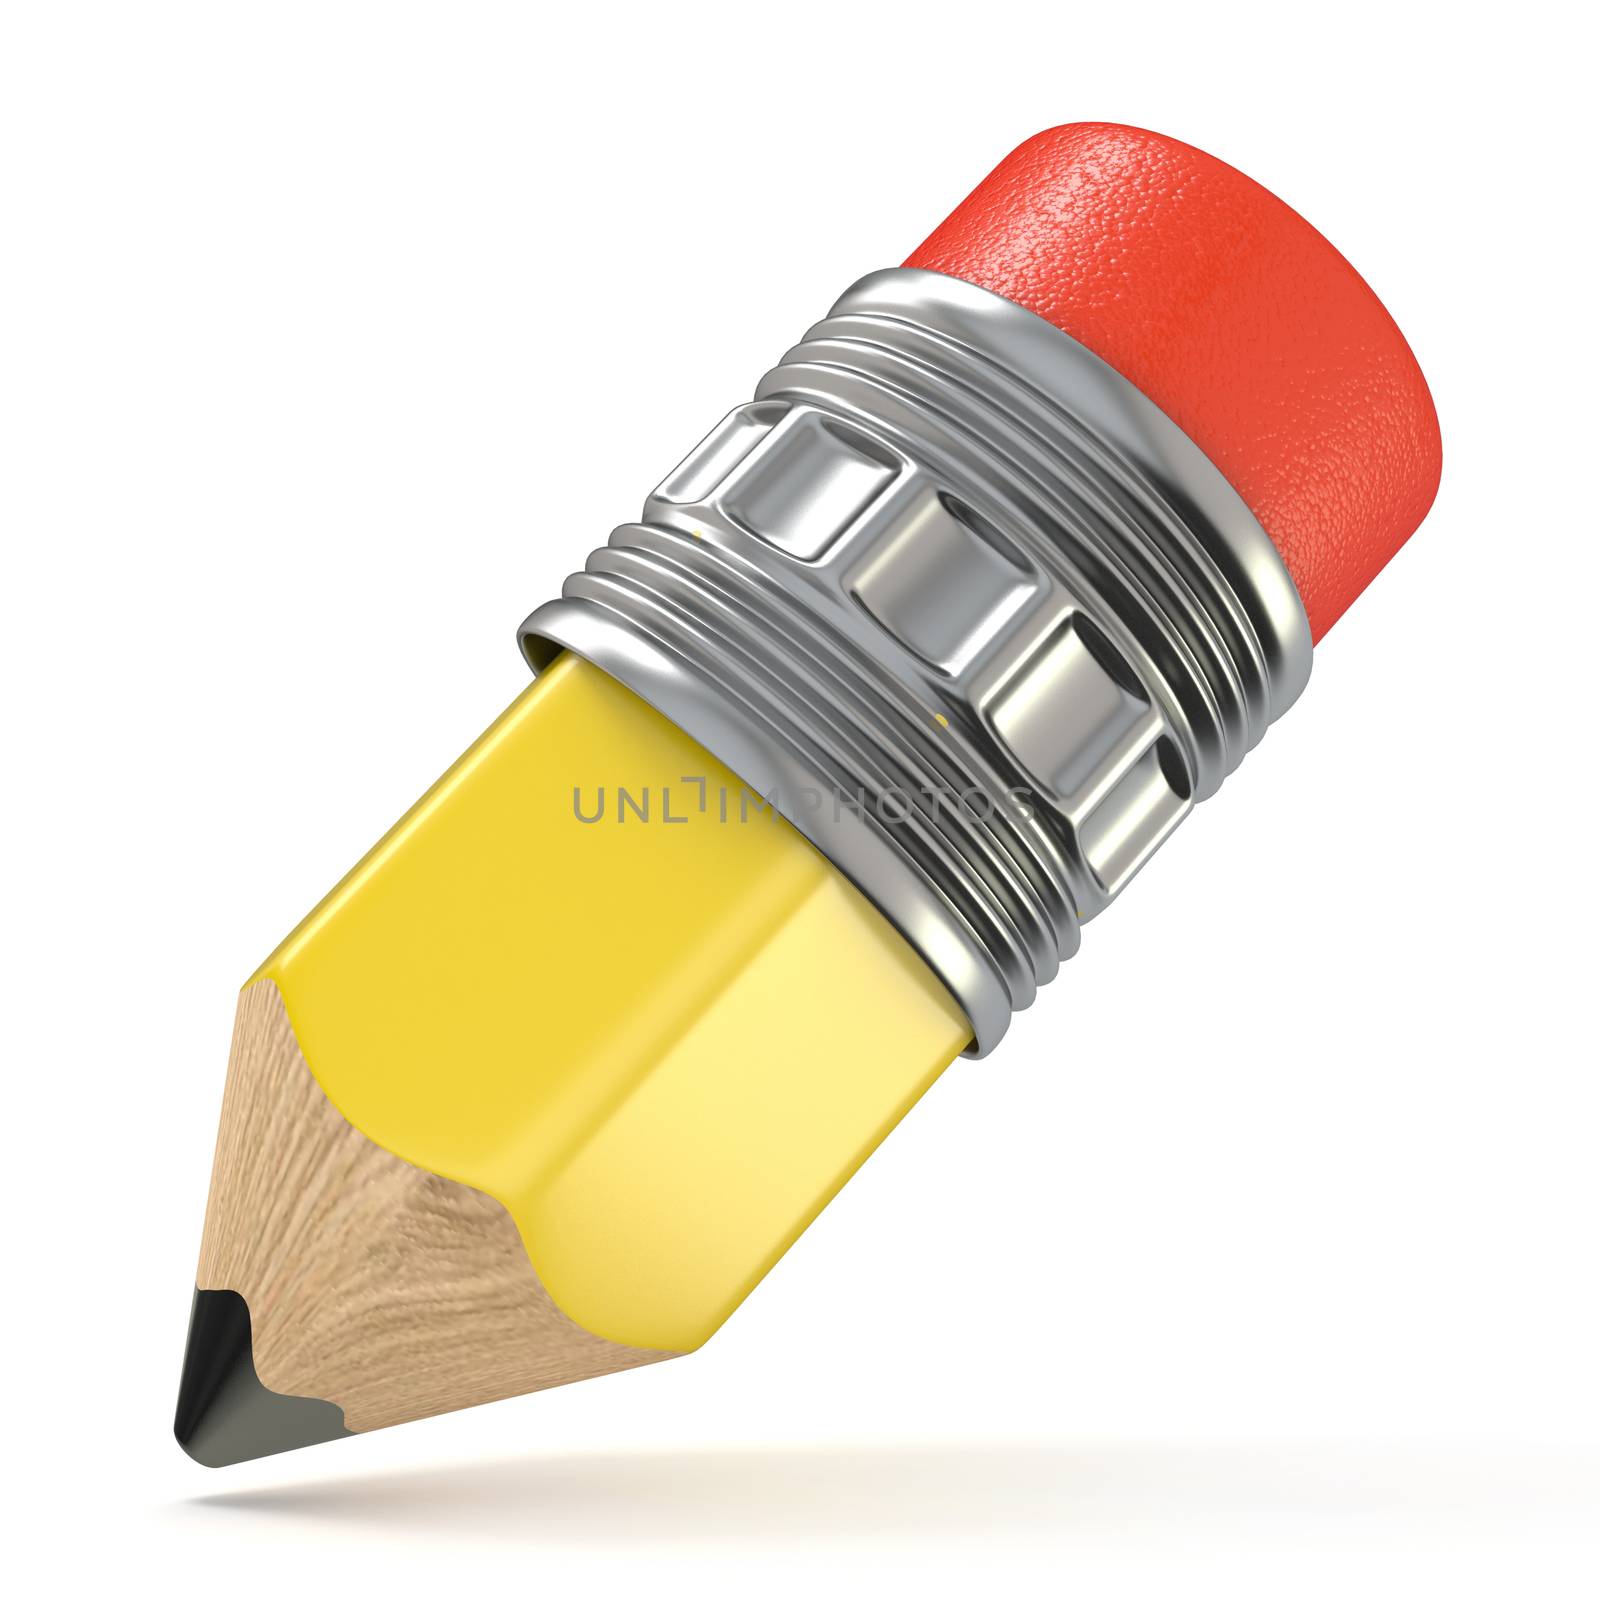 Yellow pencil. Cartoon style. 3D render illustration isolated on white background